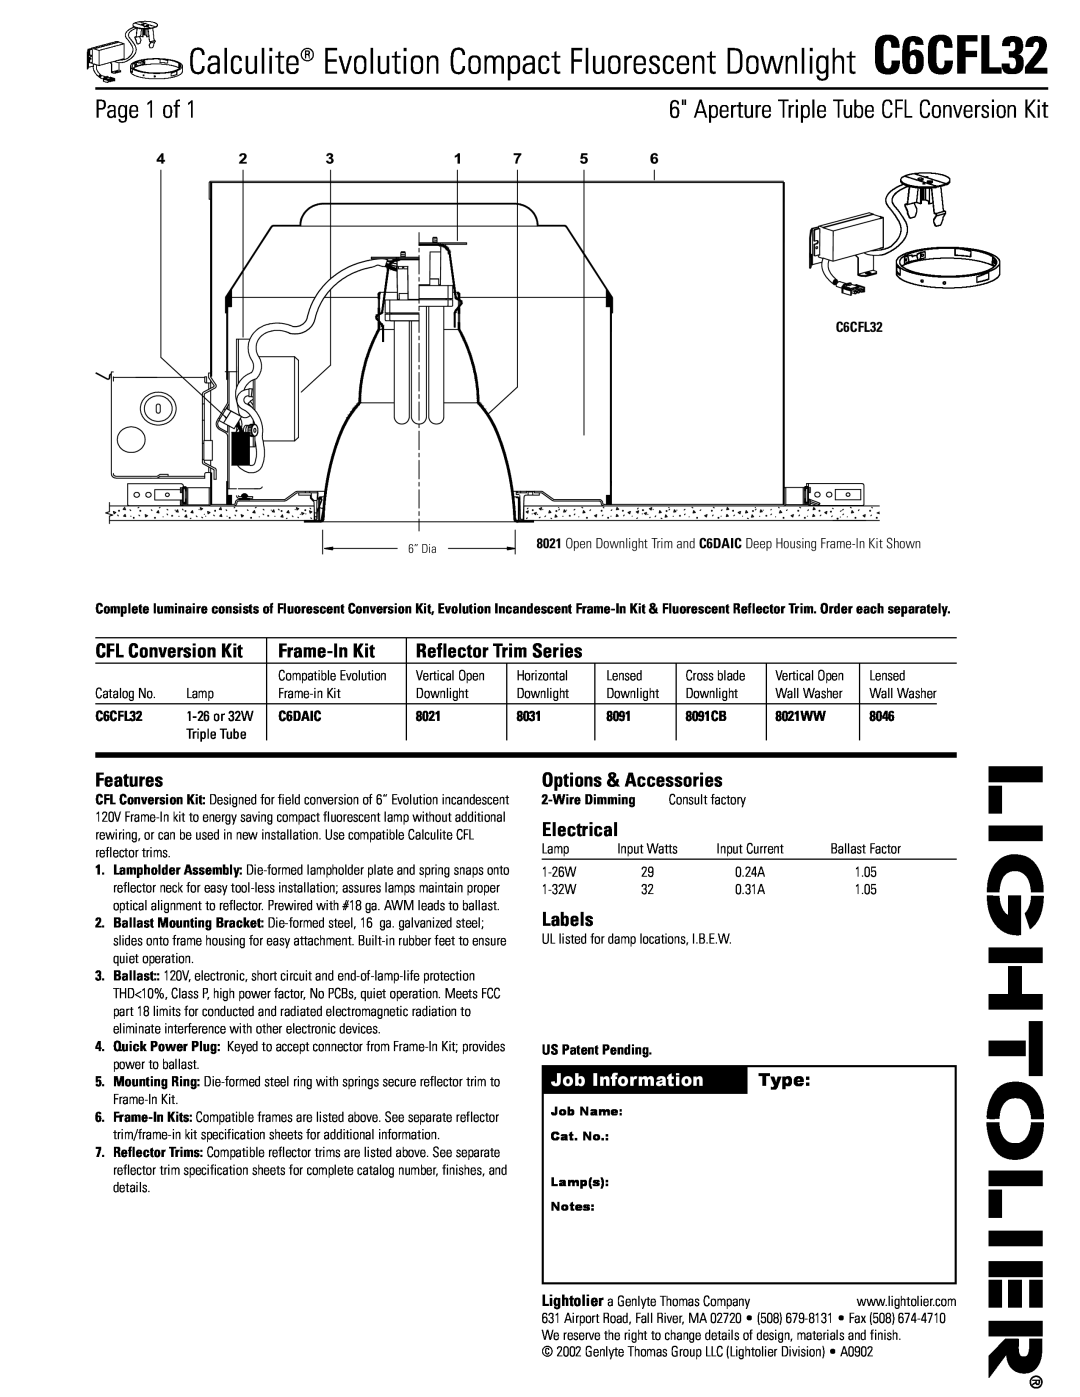 Lightolier C6CFL32 specifications Page 1 of, Aperture Triple Tube CFL Conversion Kit, Frame-InKit, Features, Electrical 